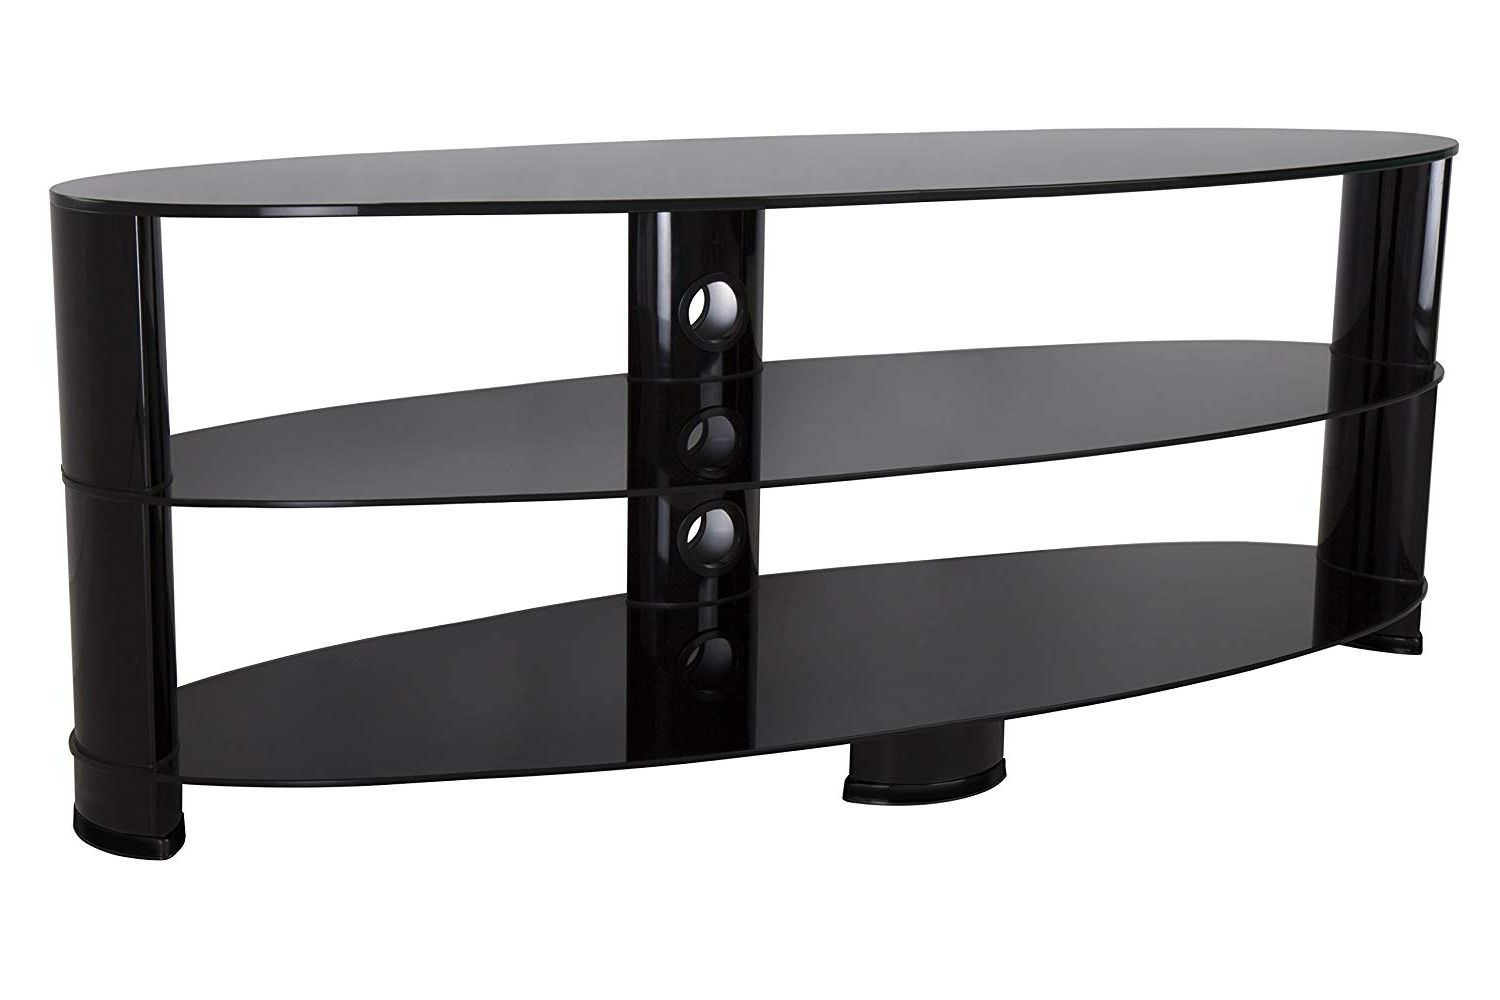 Amazon: Avf Ovl1400bb A Tv Stand Glass Shelves Tvs Up To 65 Inch Intended For Most Up To Date Glass Tv Stands (View 6 of 20)